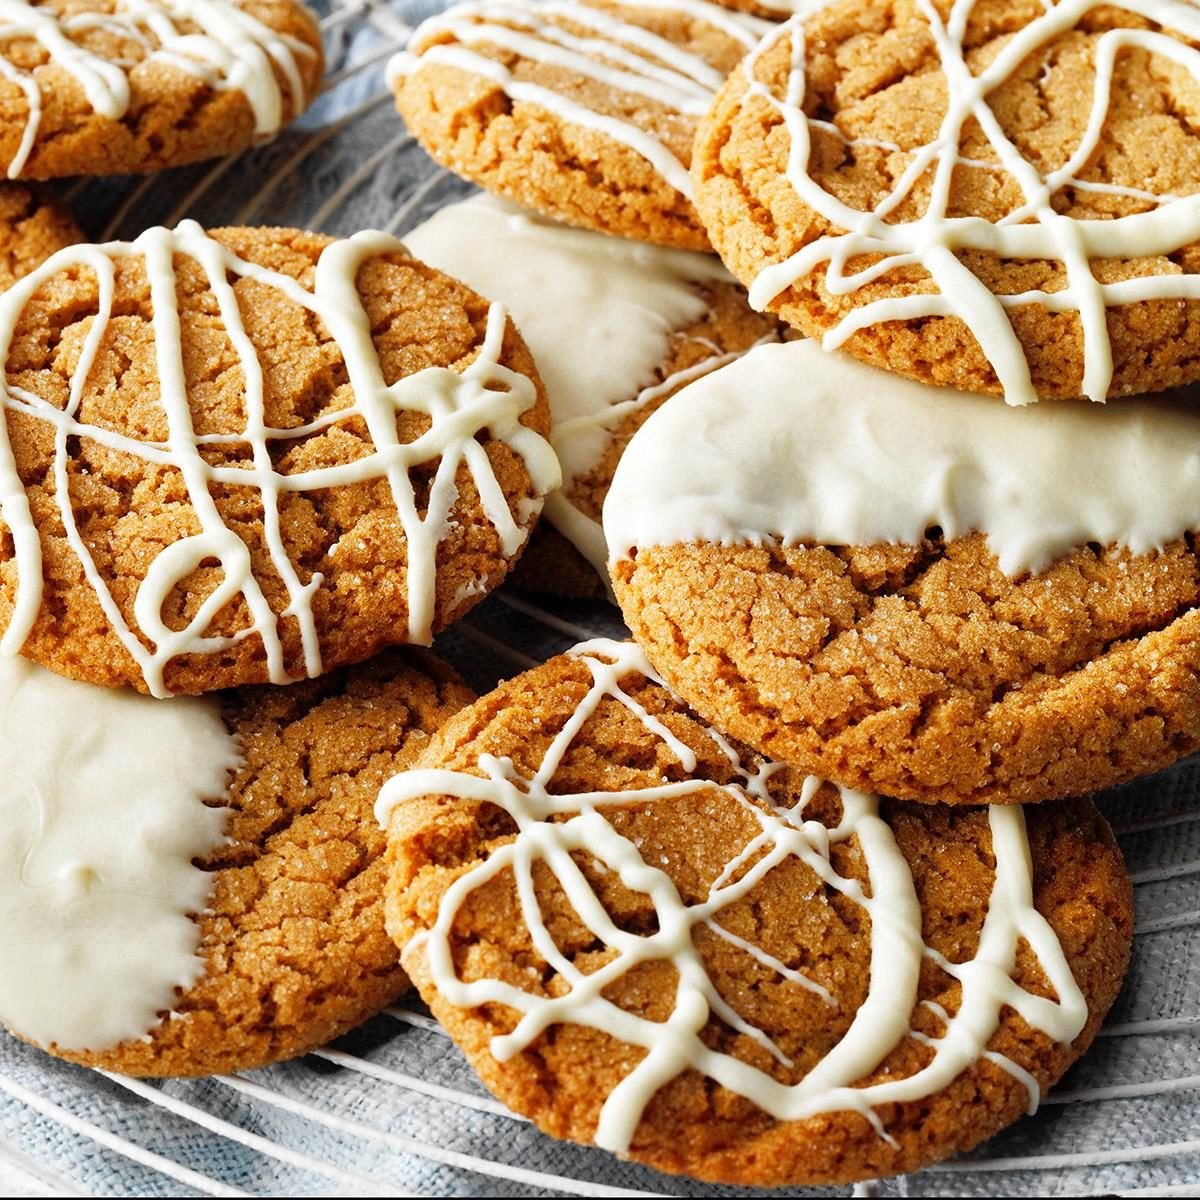 Dipped Gingersnaps Exps Hcbz22 3682 P2 Md 05 24 2b